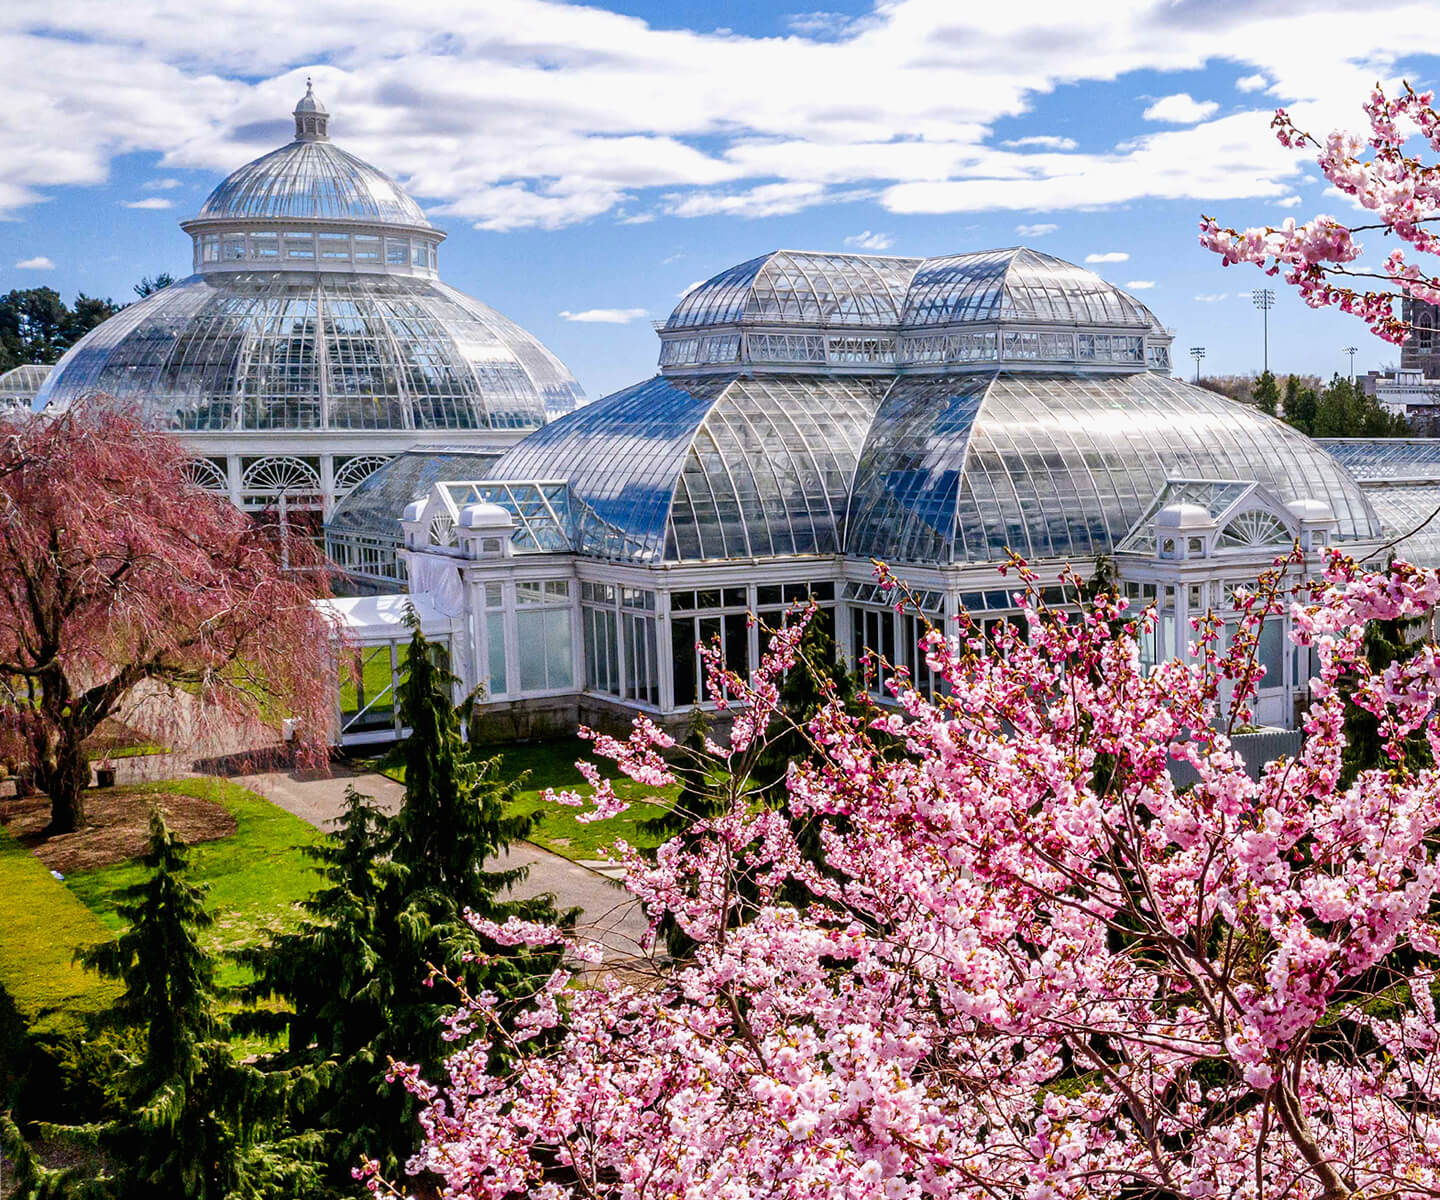 The New York Botanical Garden Enid A. Haupt Conservatory from above in spring.